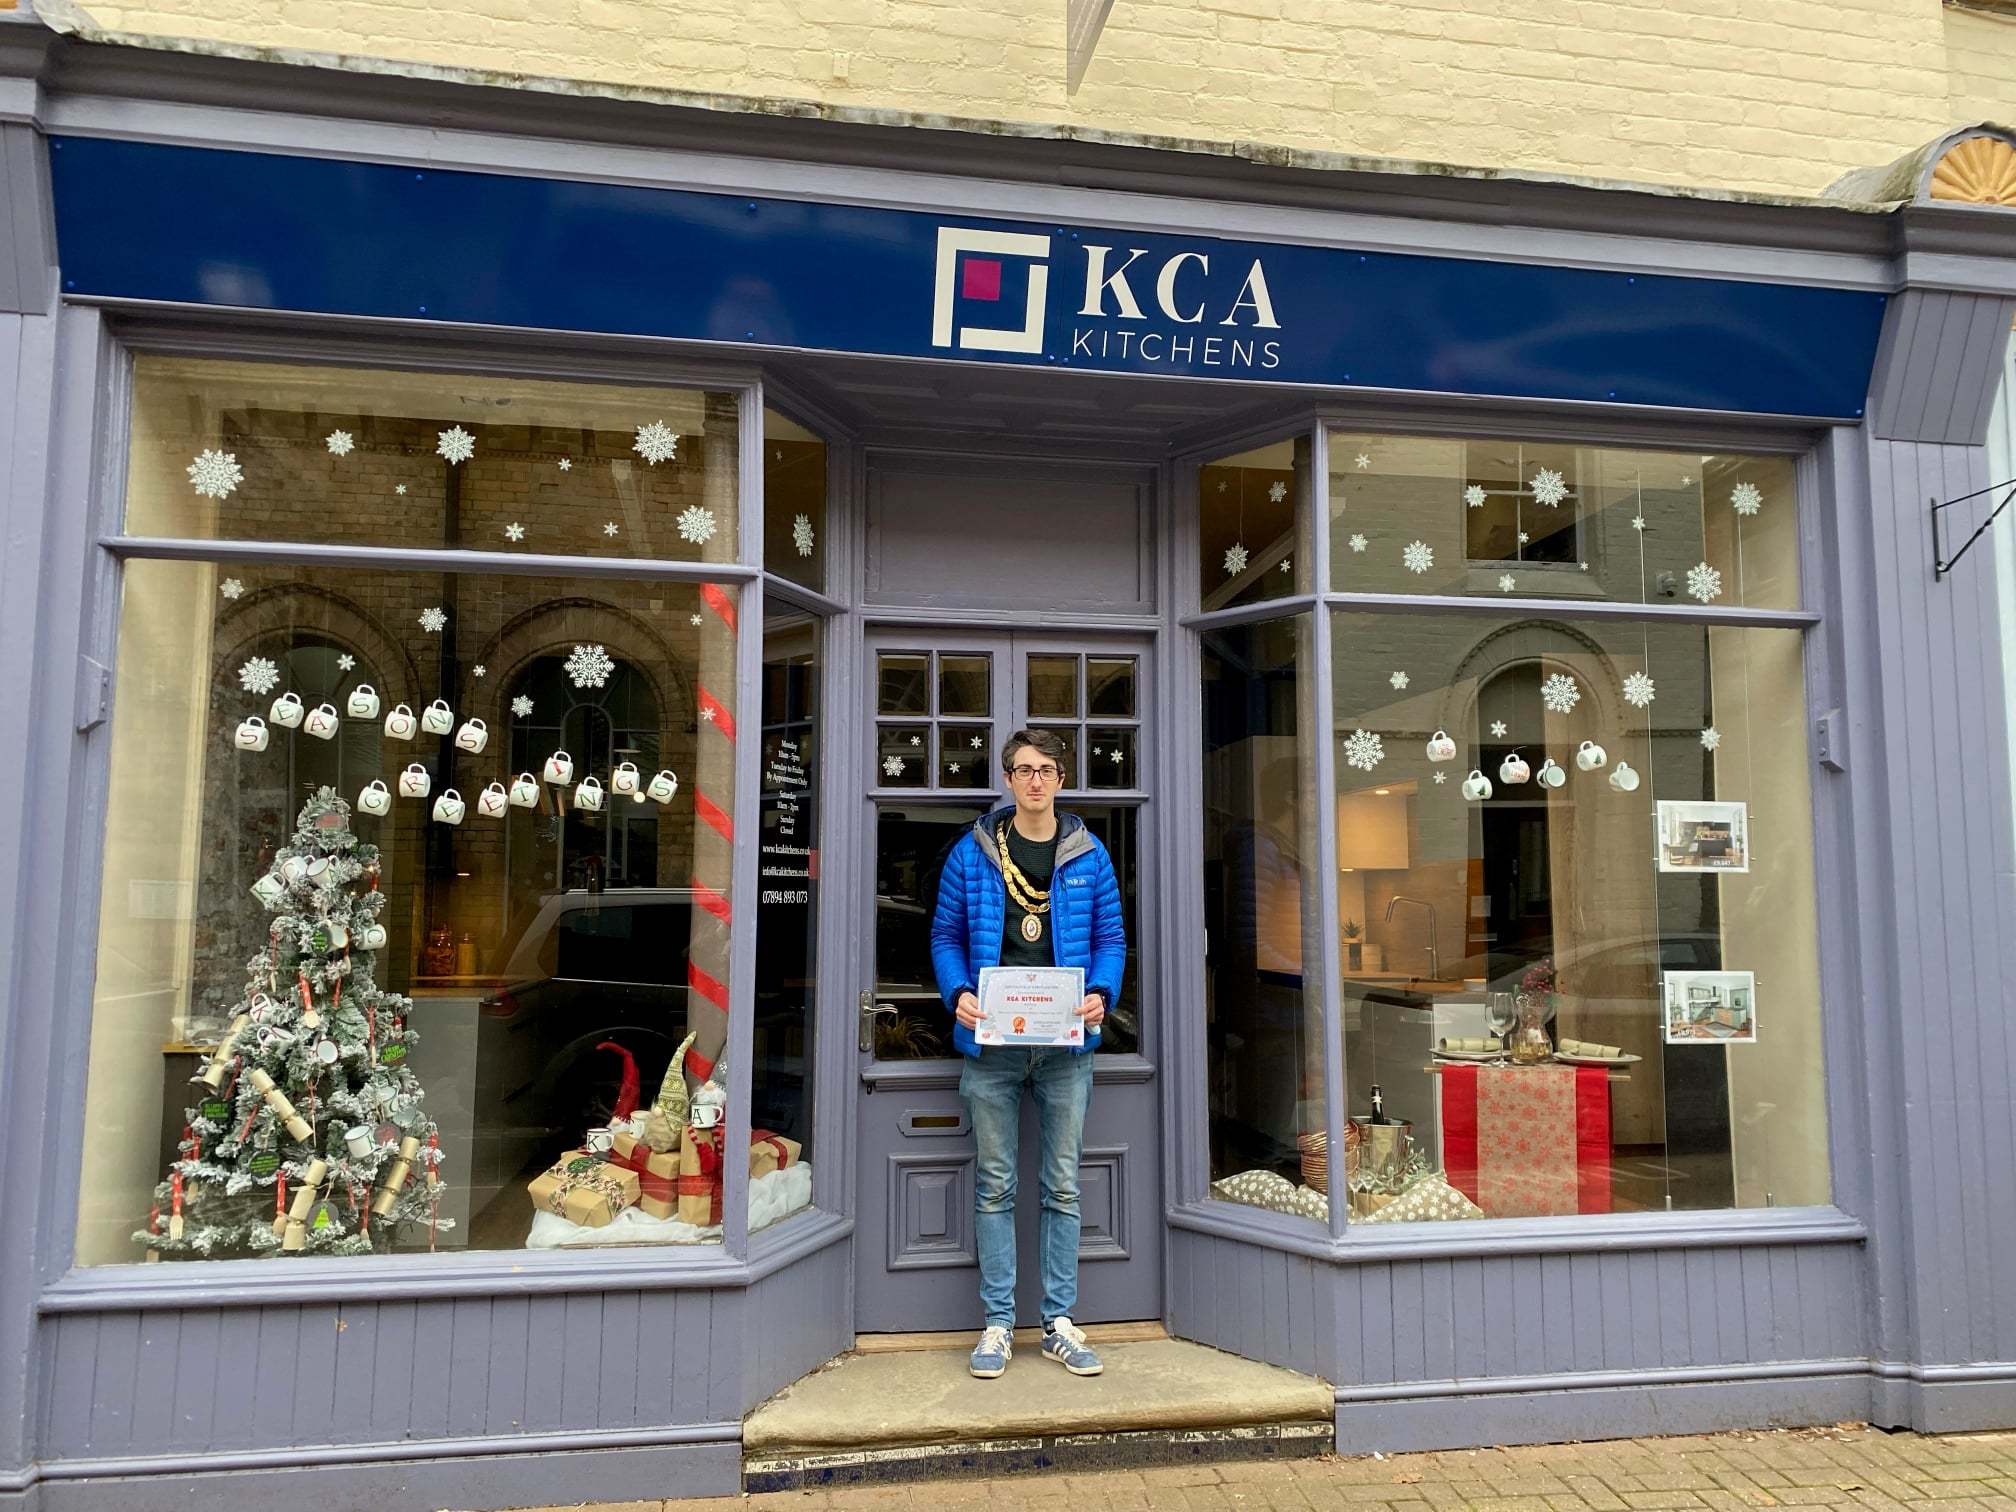 KCA Kitchens won third place in the Newtown Christmas Window Display competition 2021